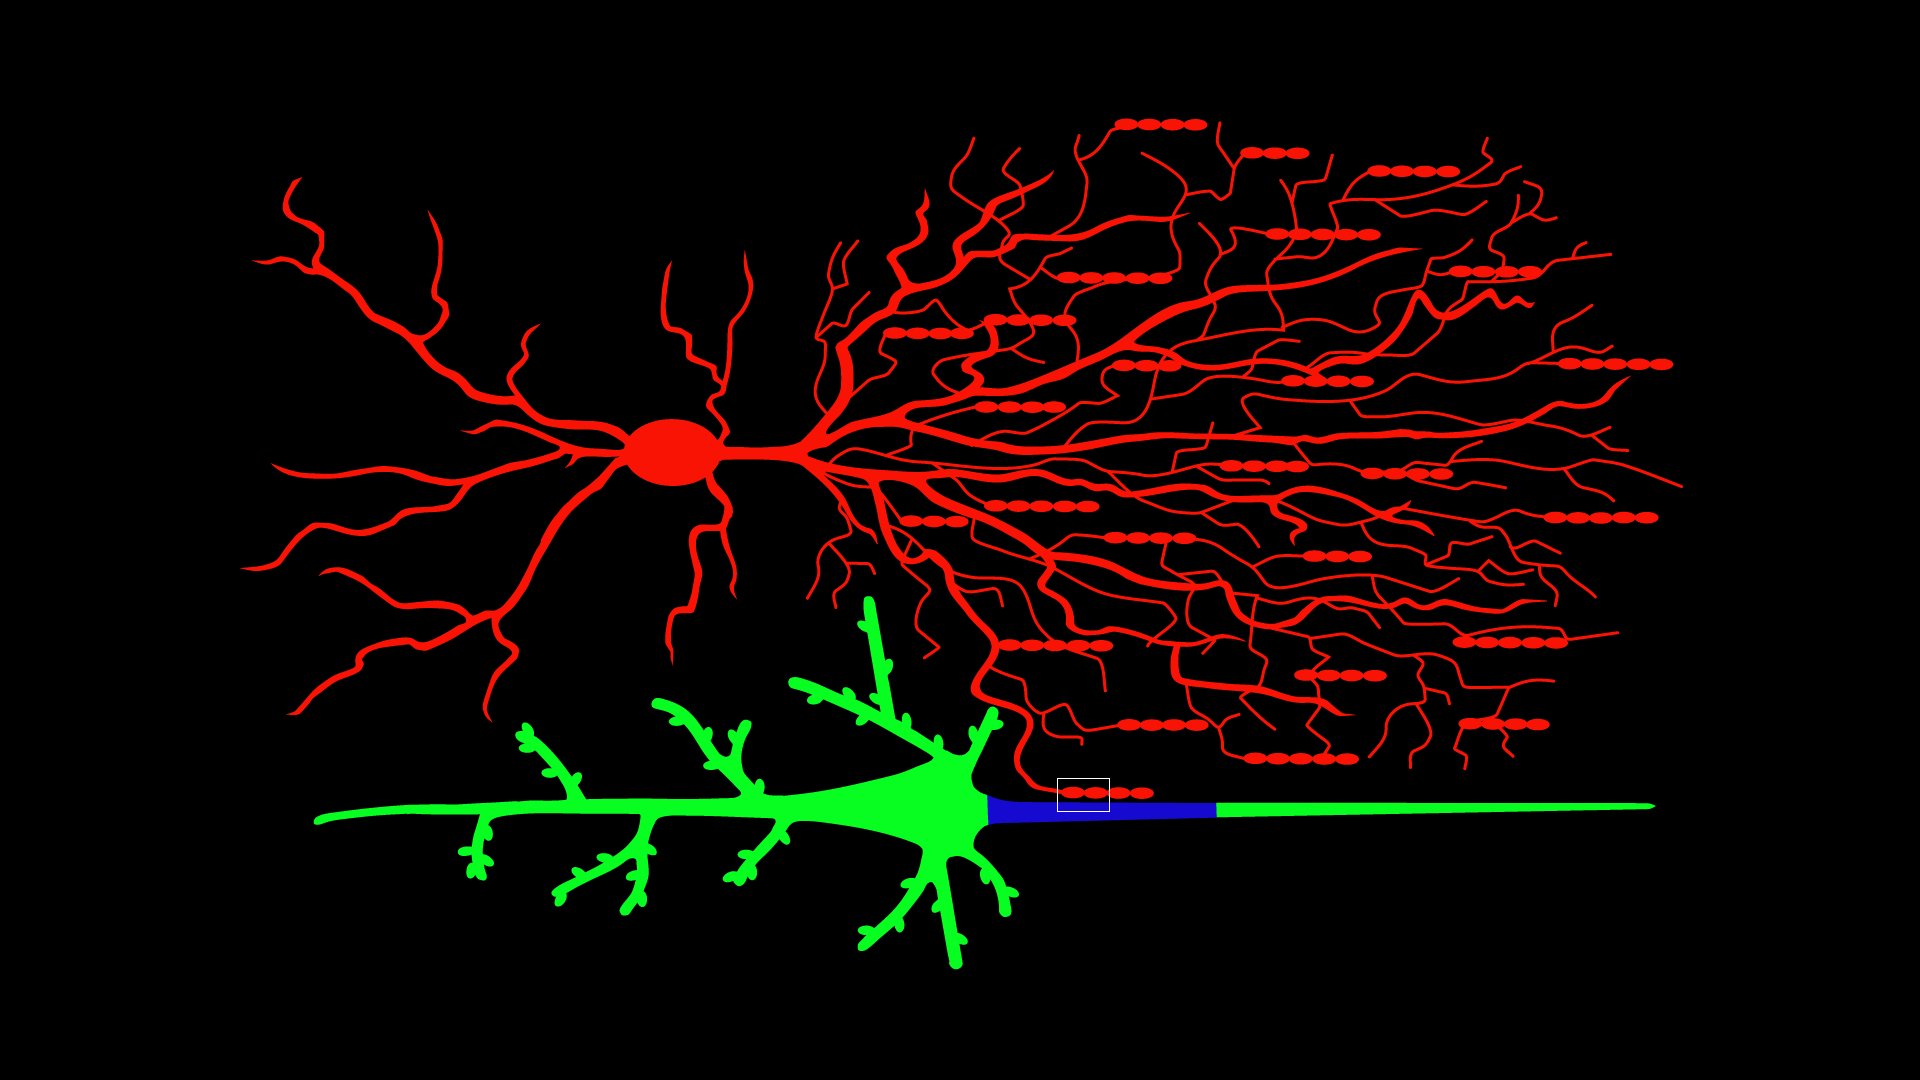 Illustration of Chandelier and pyramidal neuron